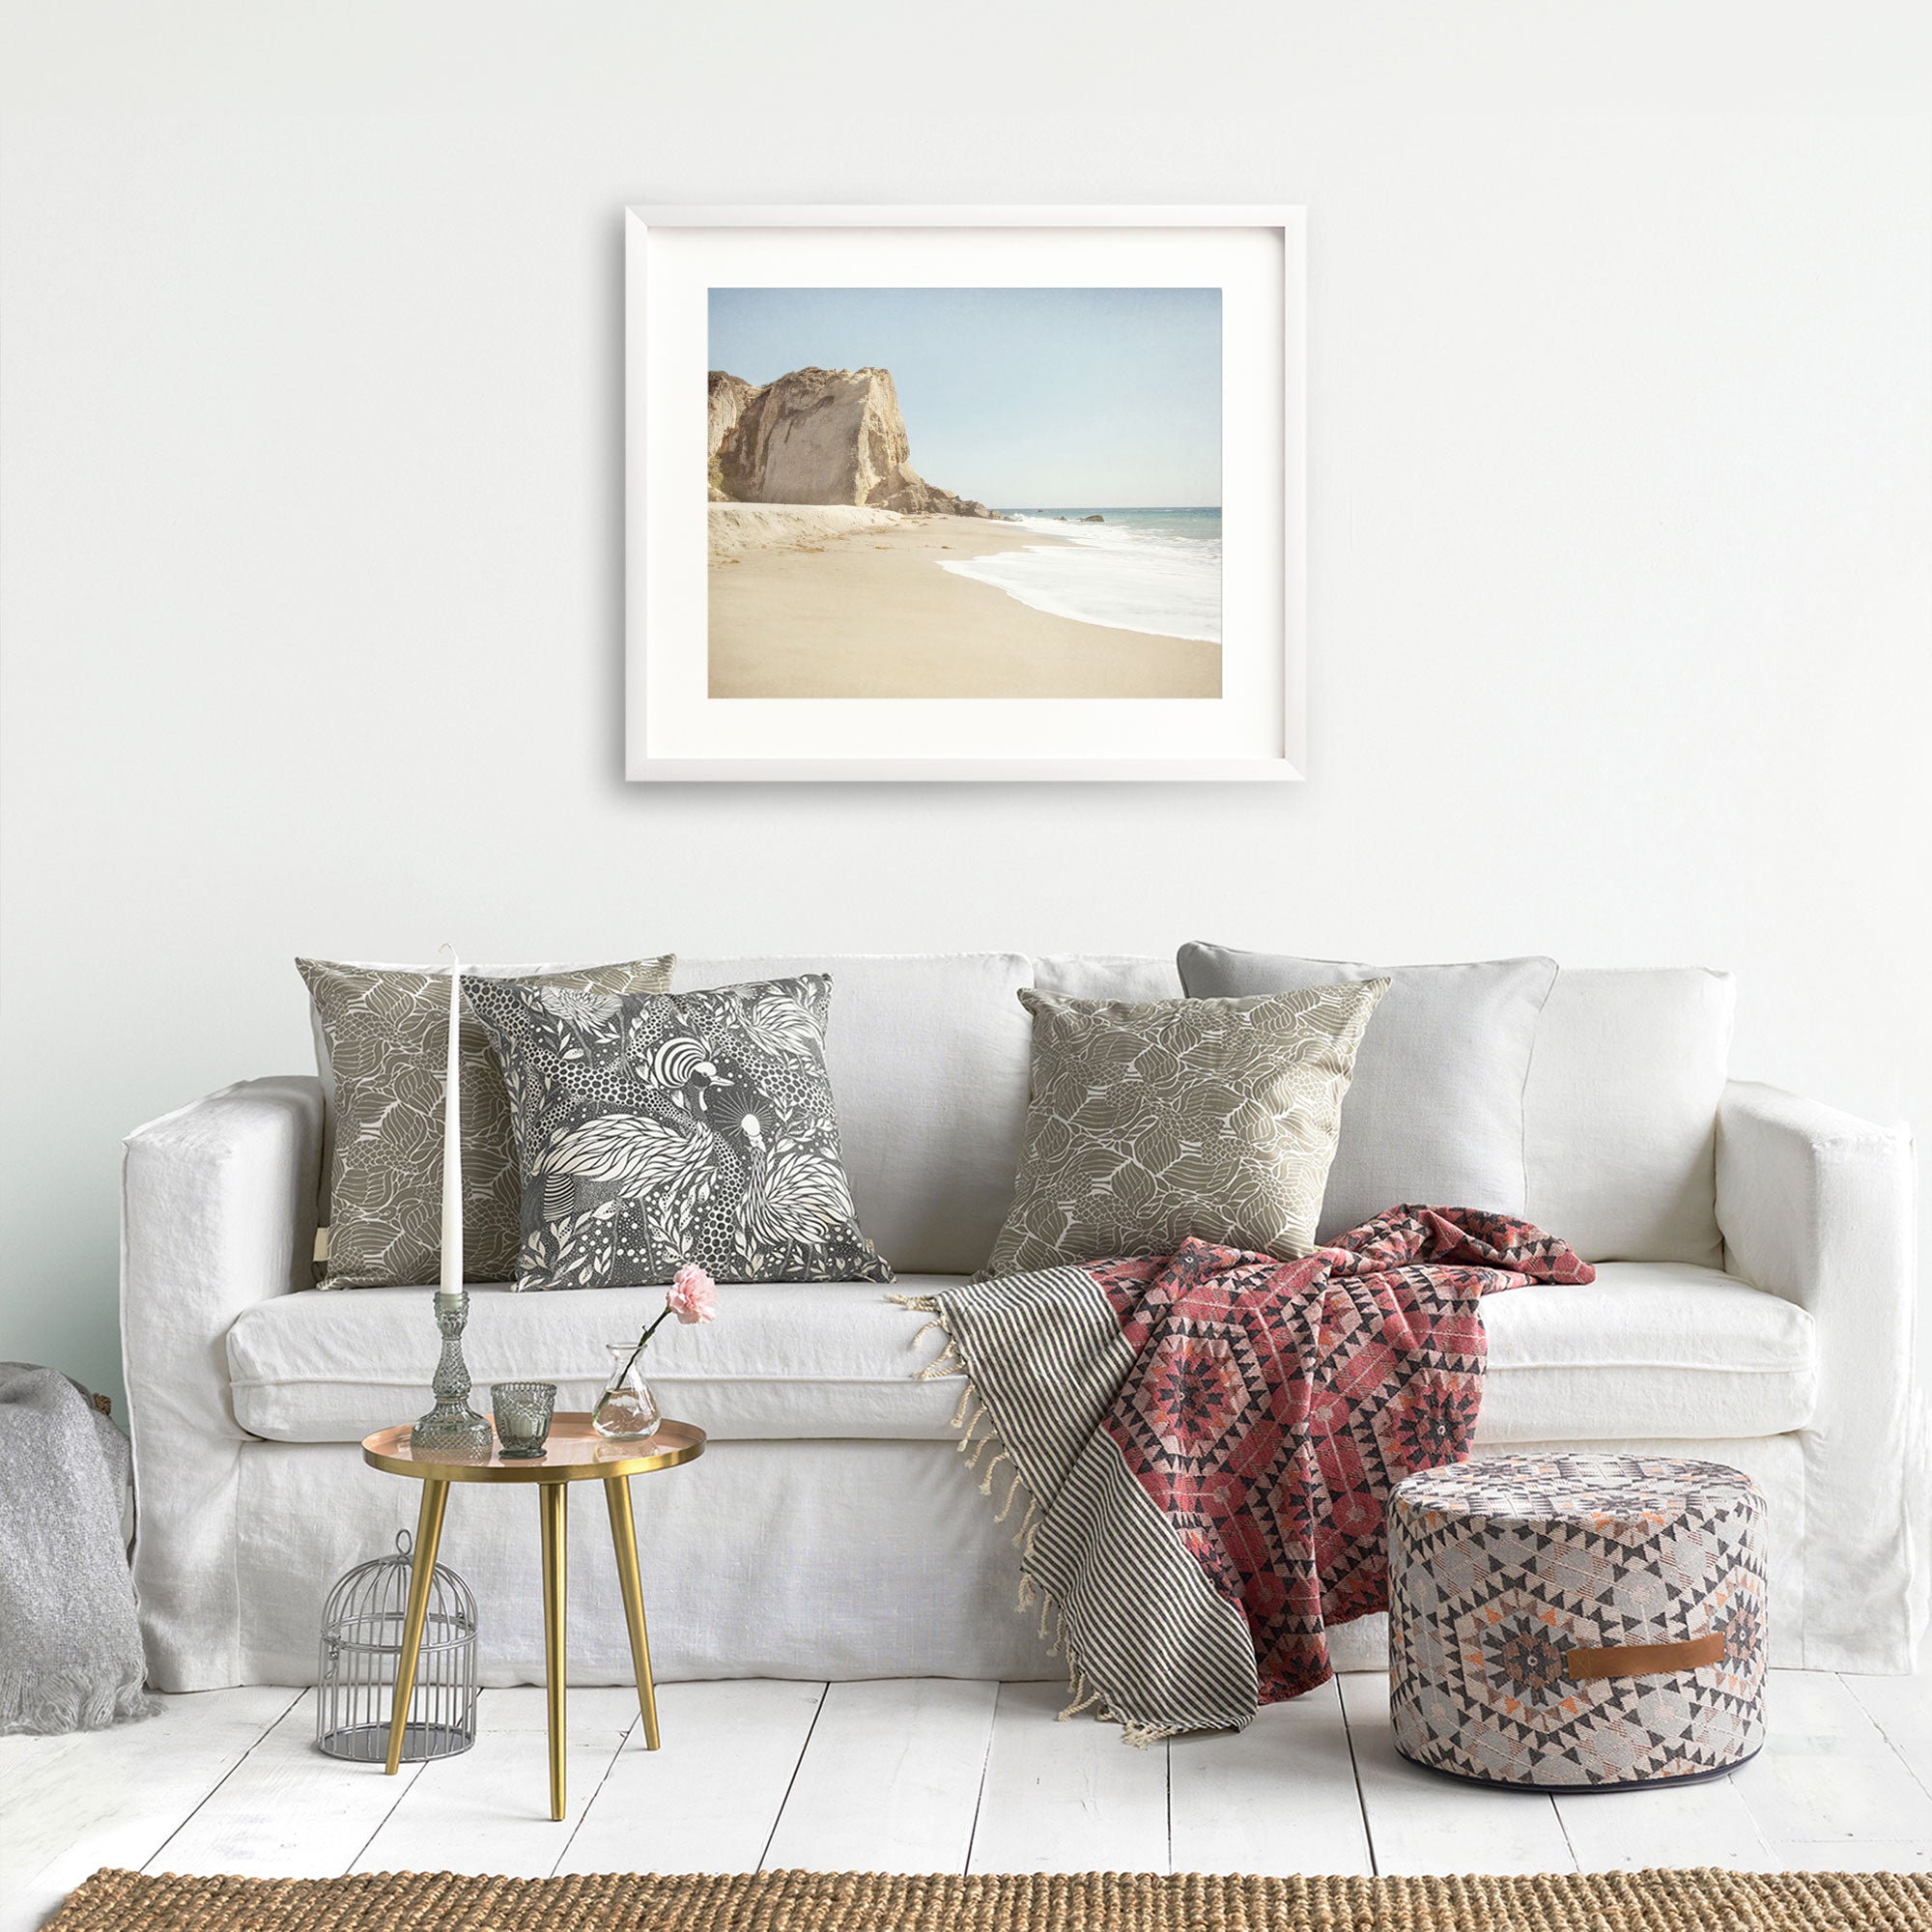 A cozy living room with a white couch adorned with decorative pillows, a framed Offley Green California Malibu Print, 'Point Dume' landscape on the wall, a small table with a vase next to the sofa, a blanket, and a pattern.